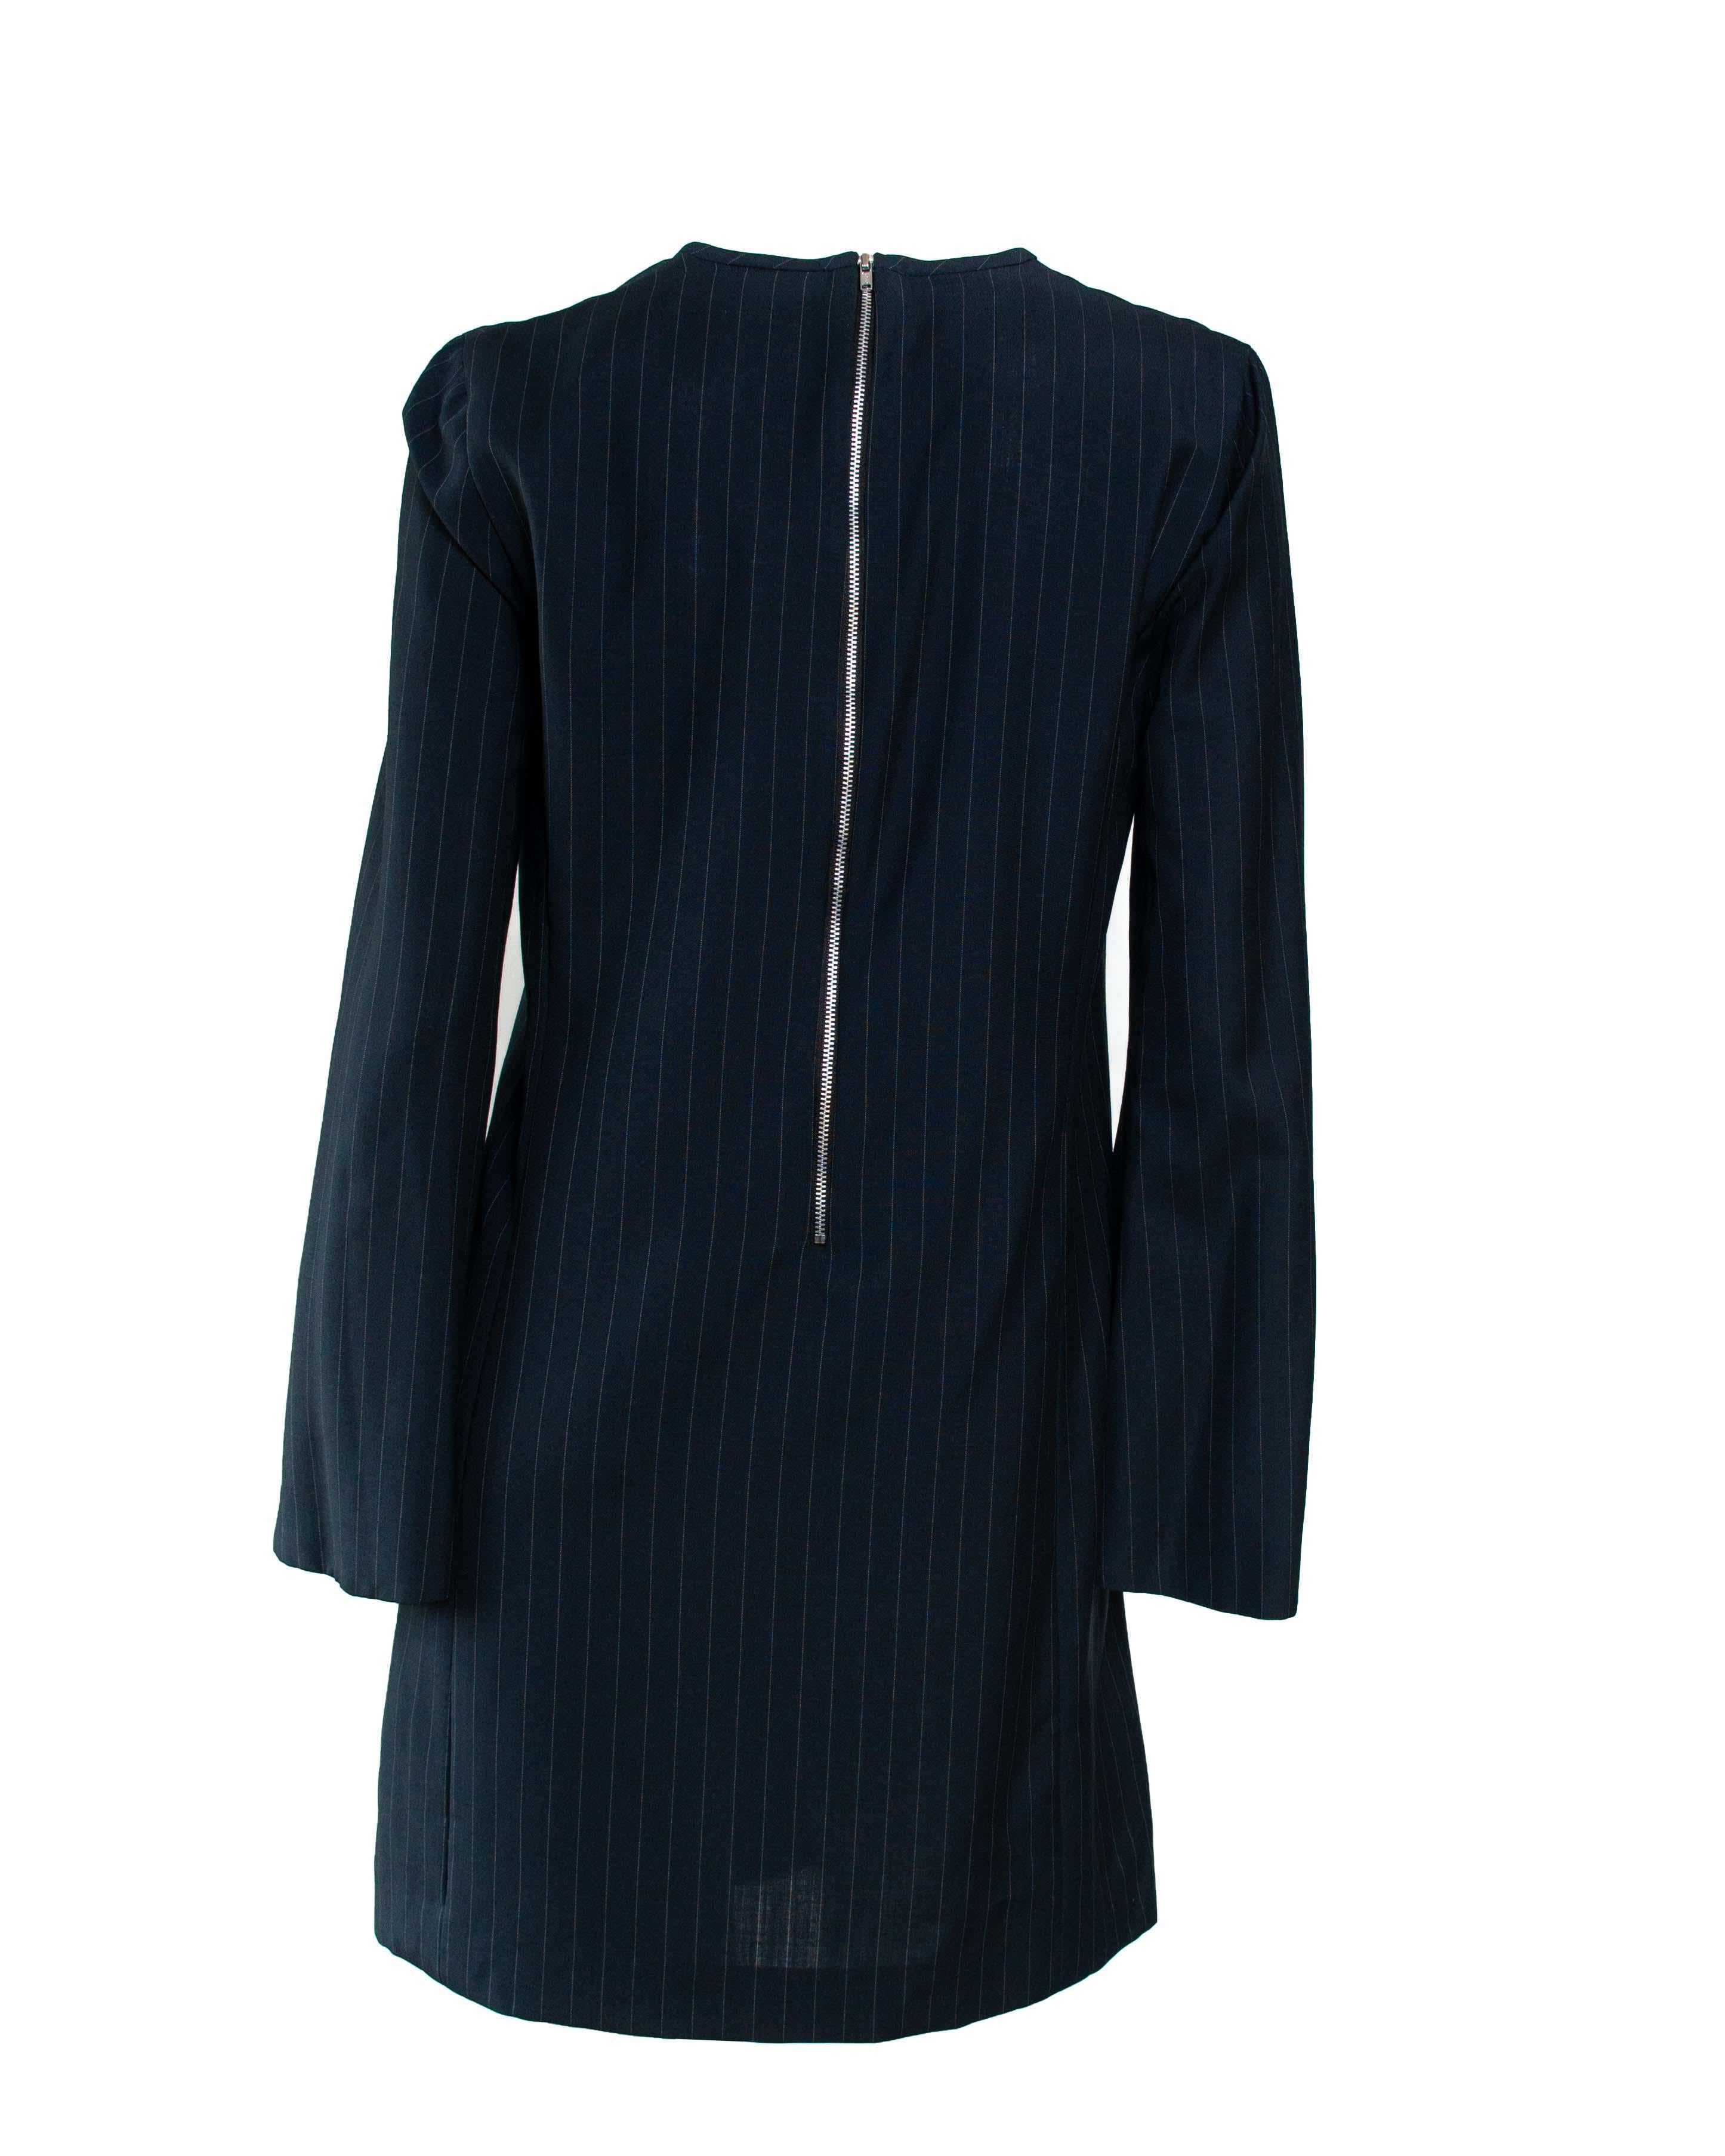 Women's S/S 1996 Gucci Tom Ford Pinstripe Mini Tunic Runway Dress with GG Clasp